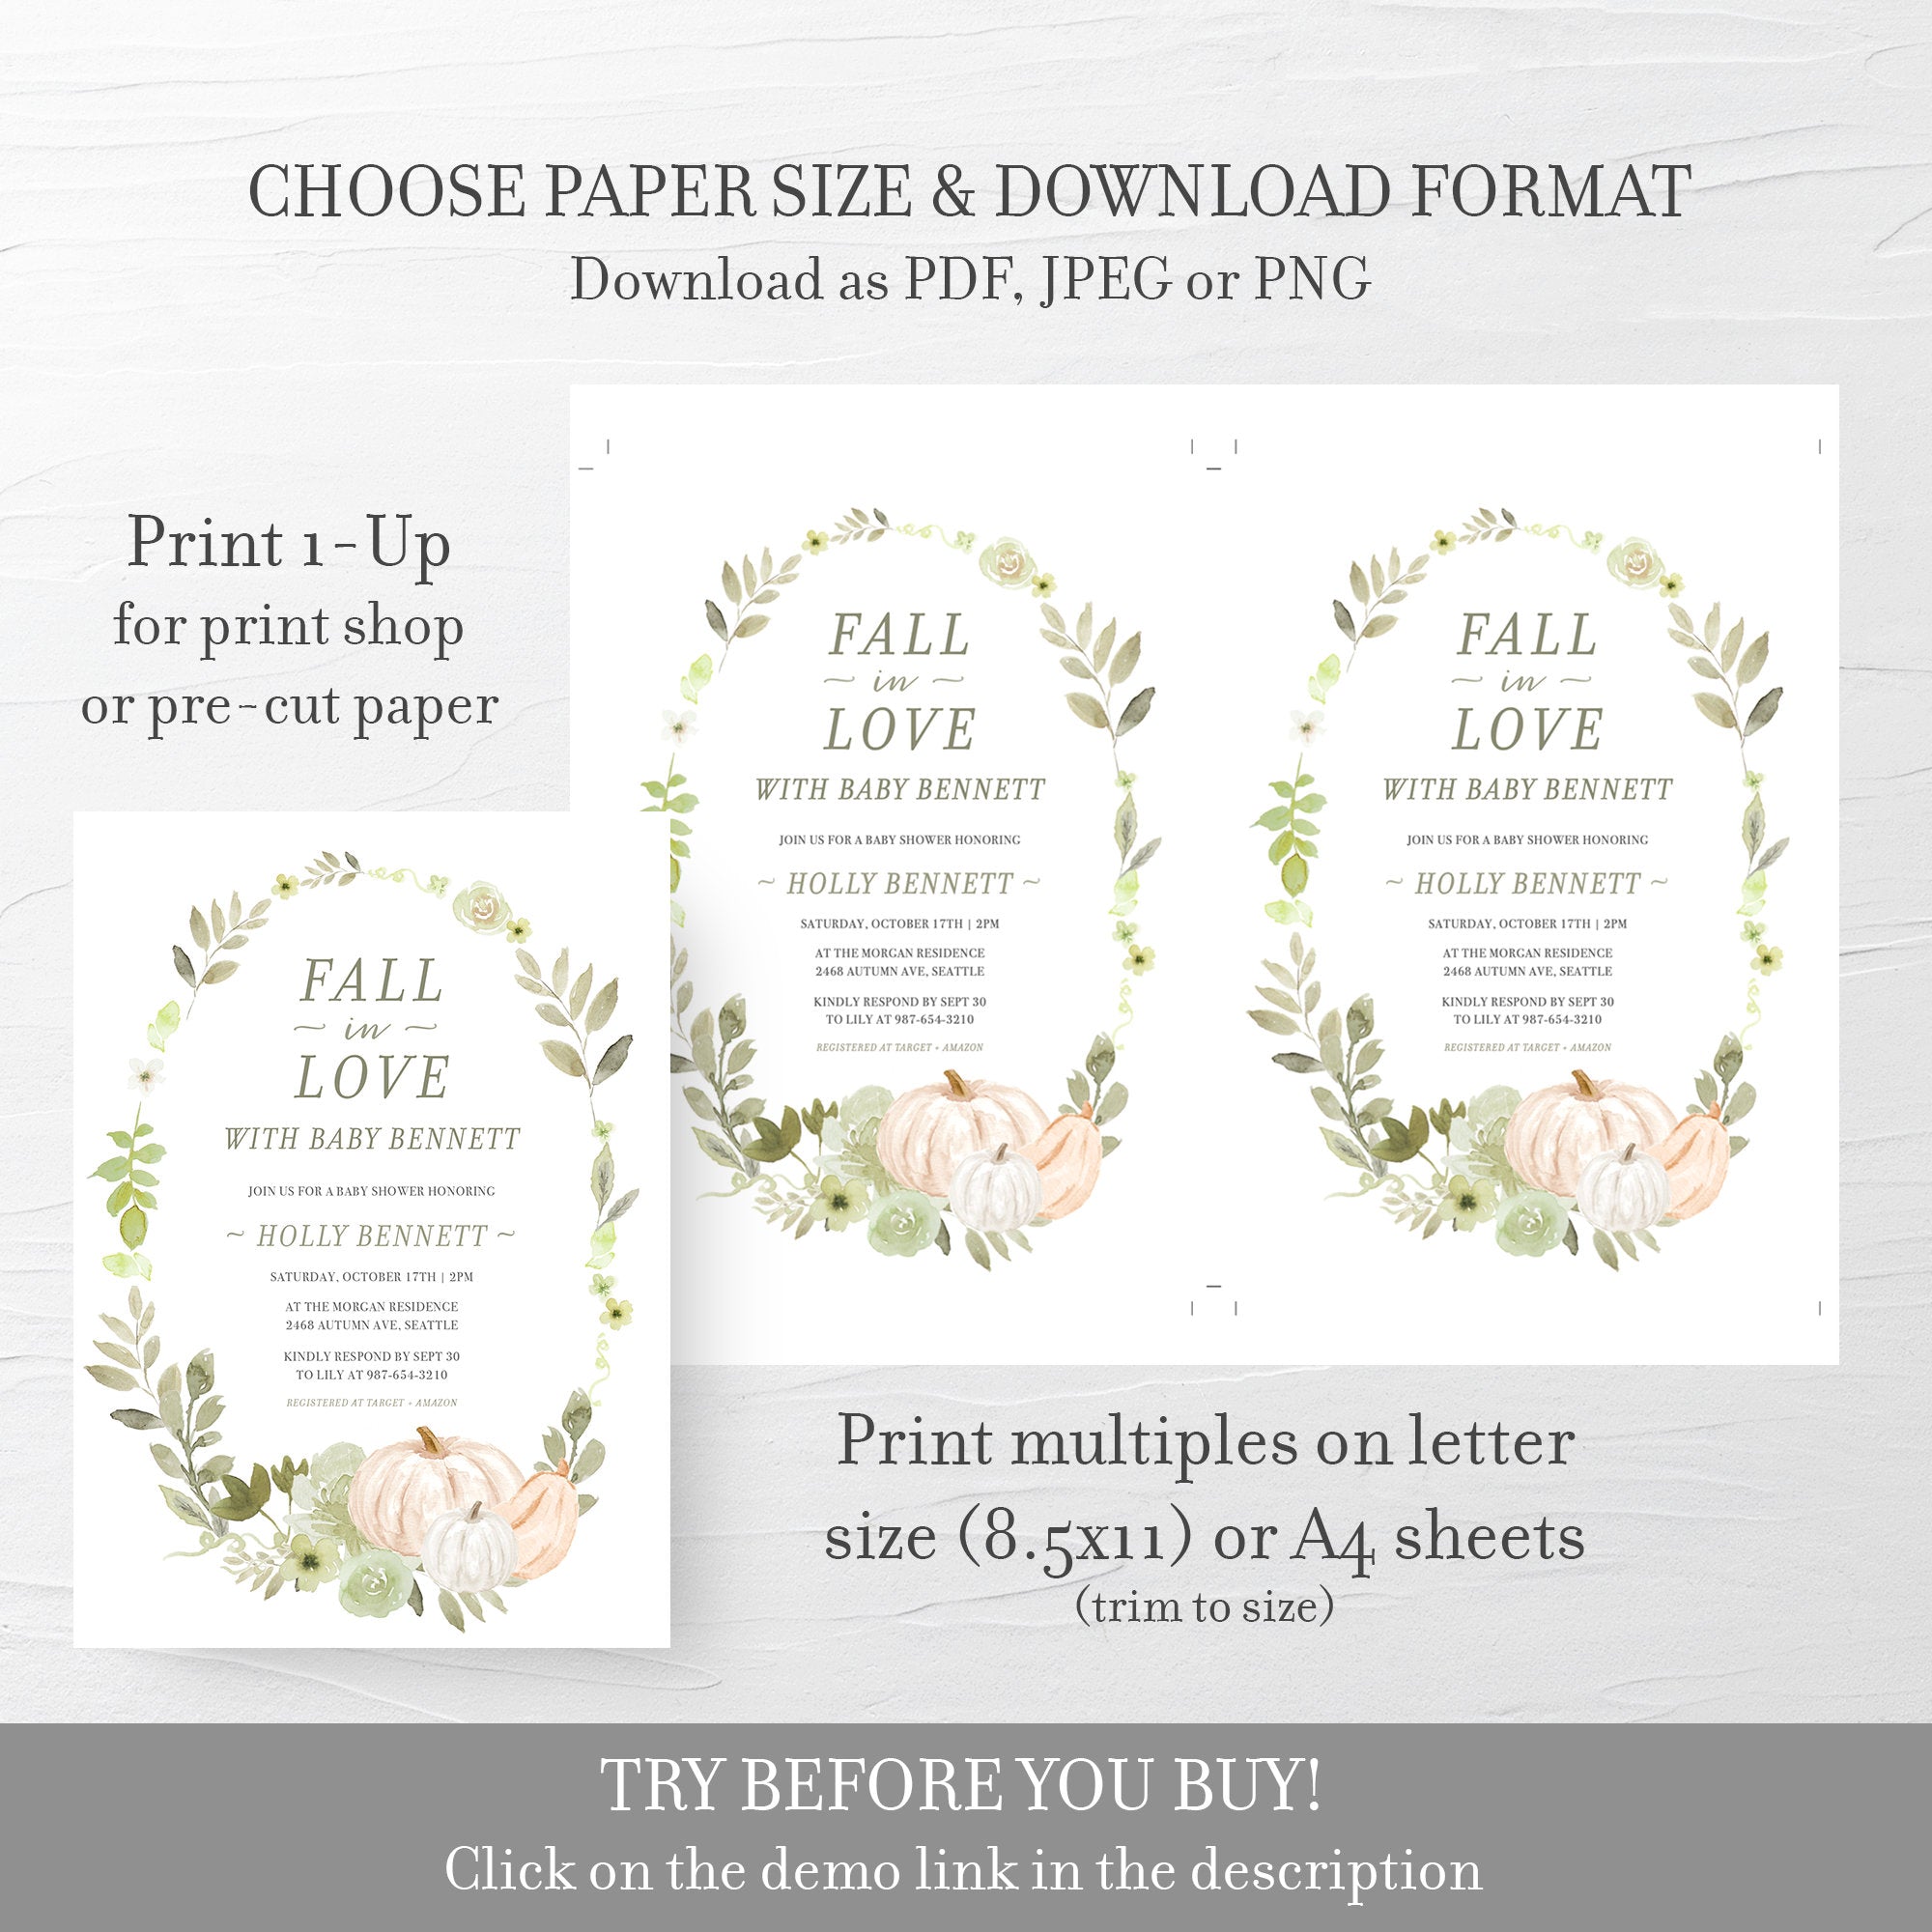 Fall Baby Shower Invite Template, Fall In Love Baby Shower Invitation, Printable Pumpkin Fall Baby Shower Invitation INSTANT DOWNLOAD PG100